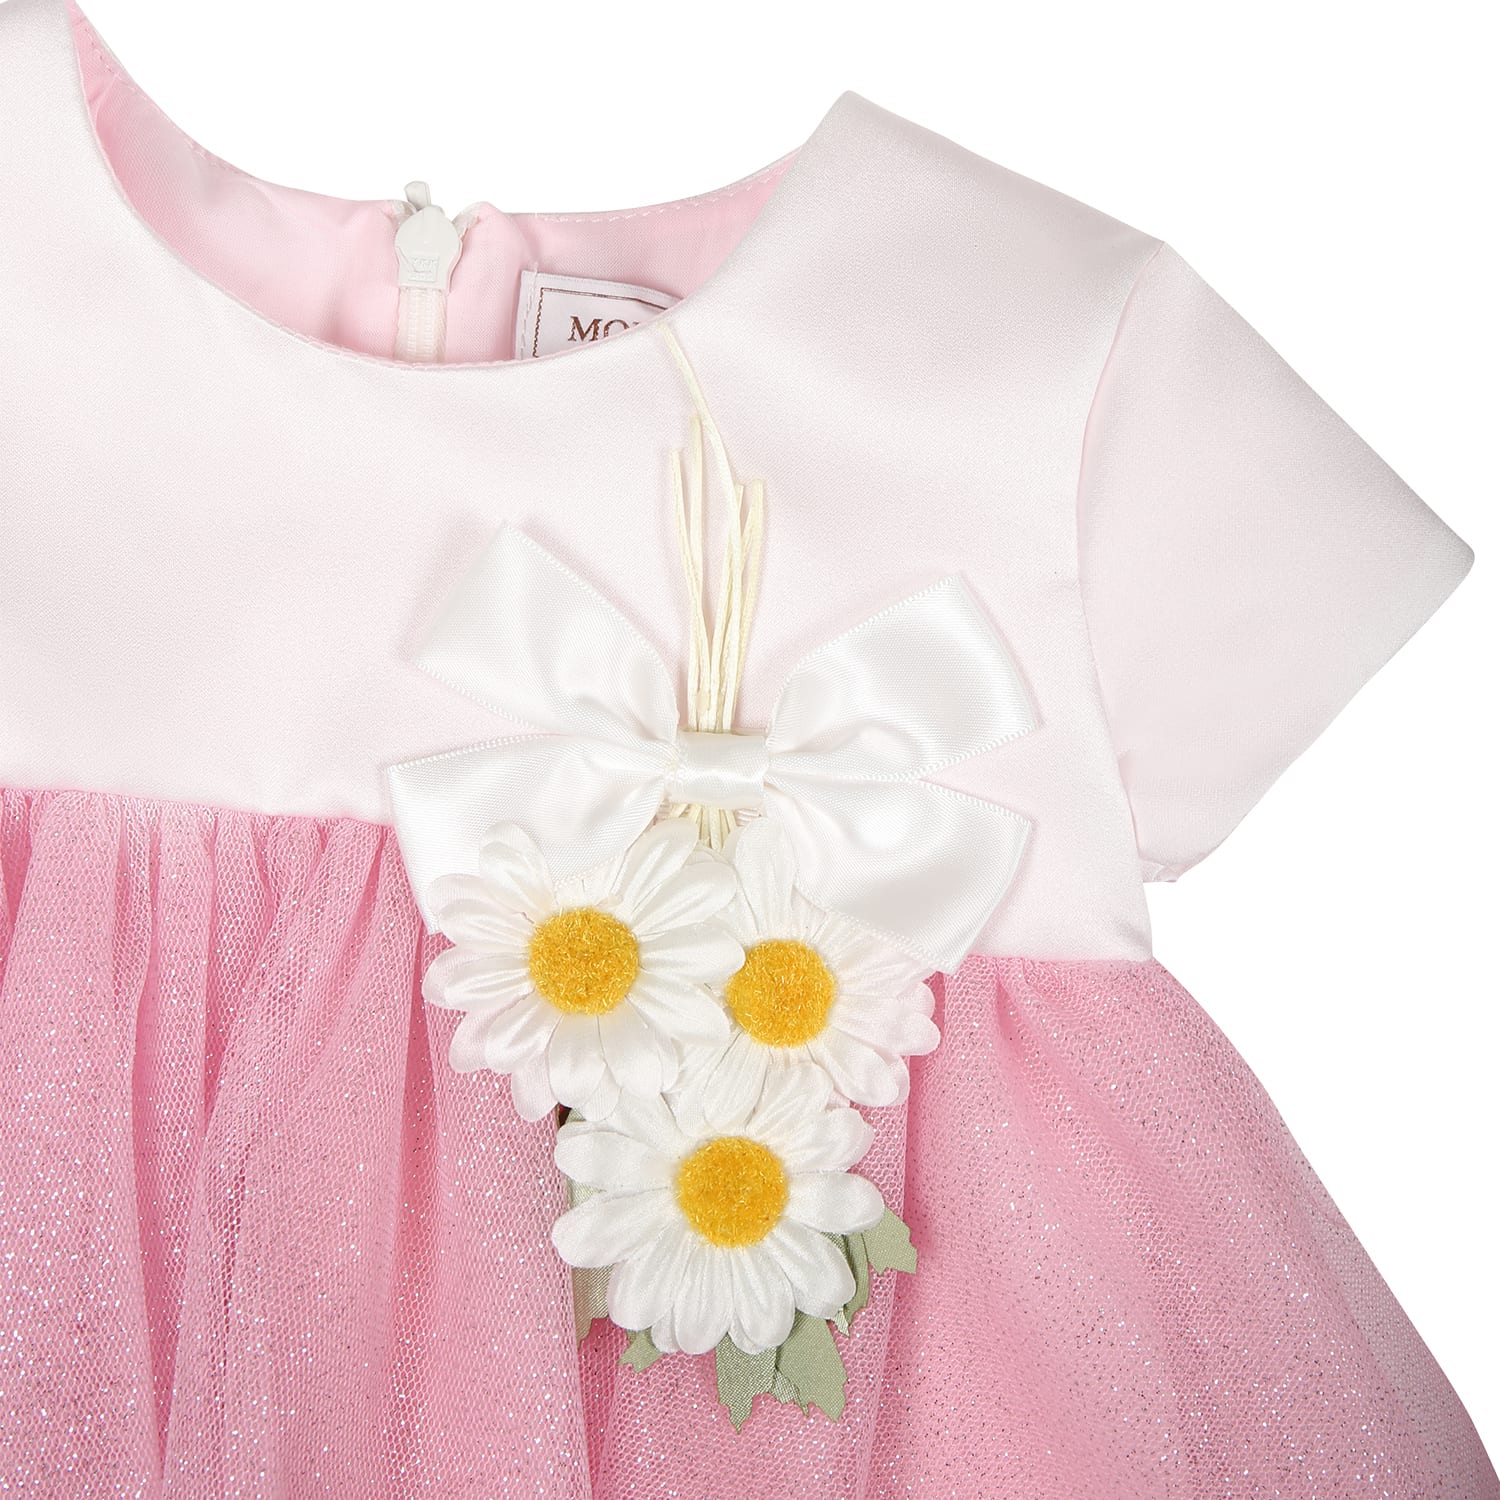 Shop Monnalisa Pink Dress For Baby Girl With Daisies And Lurex